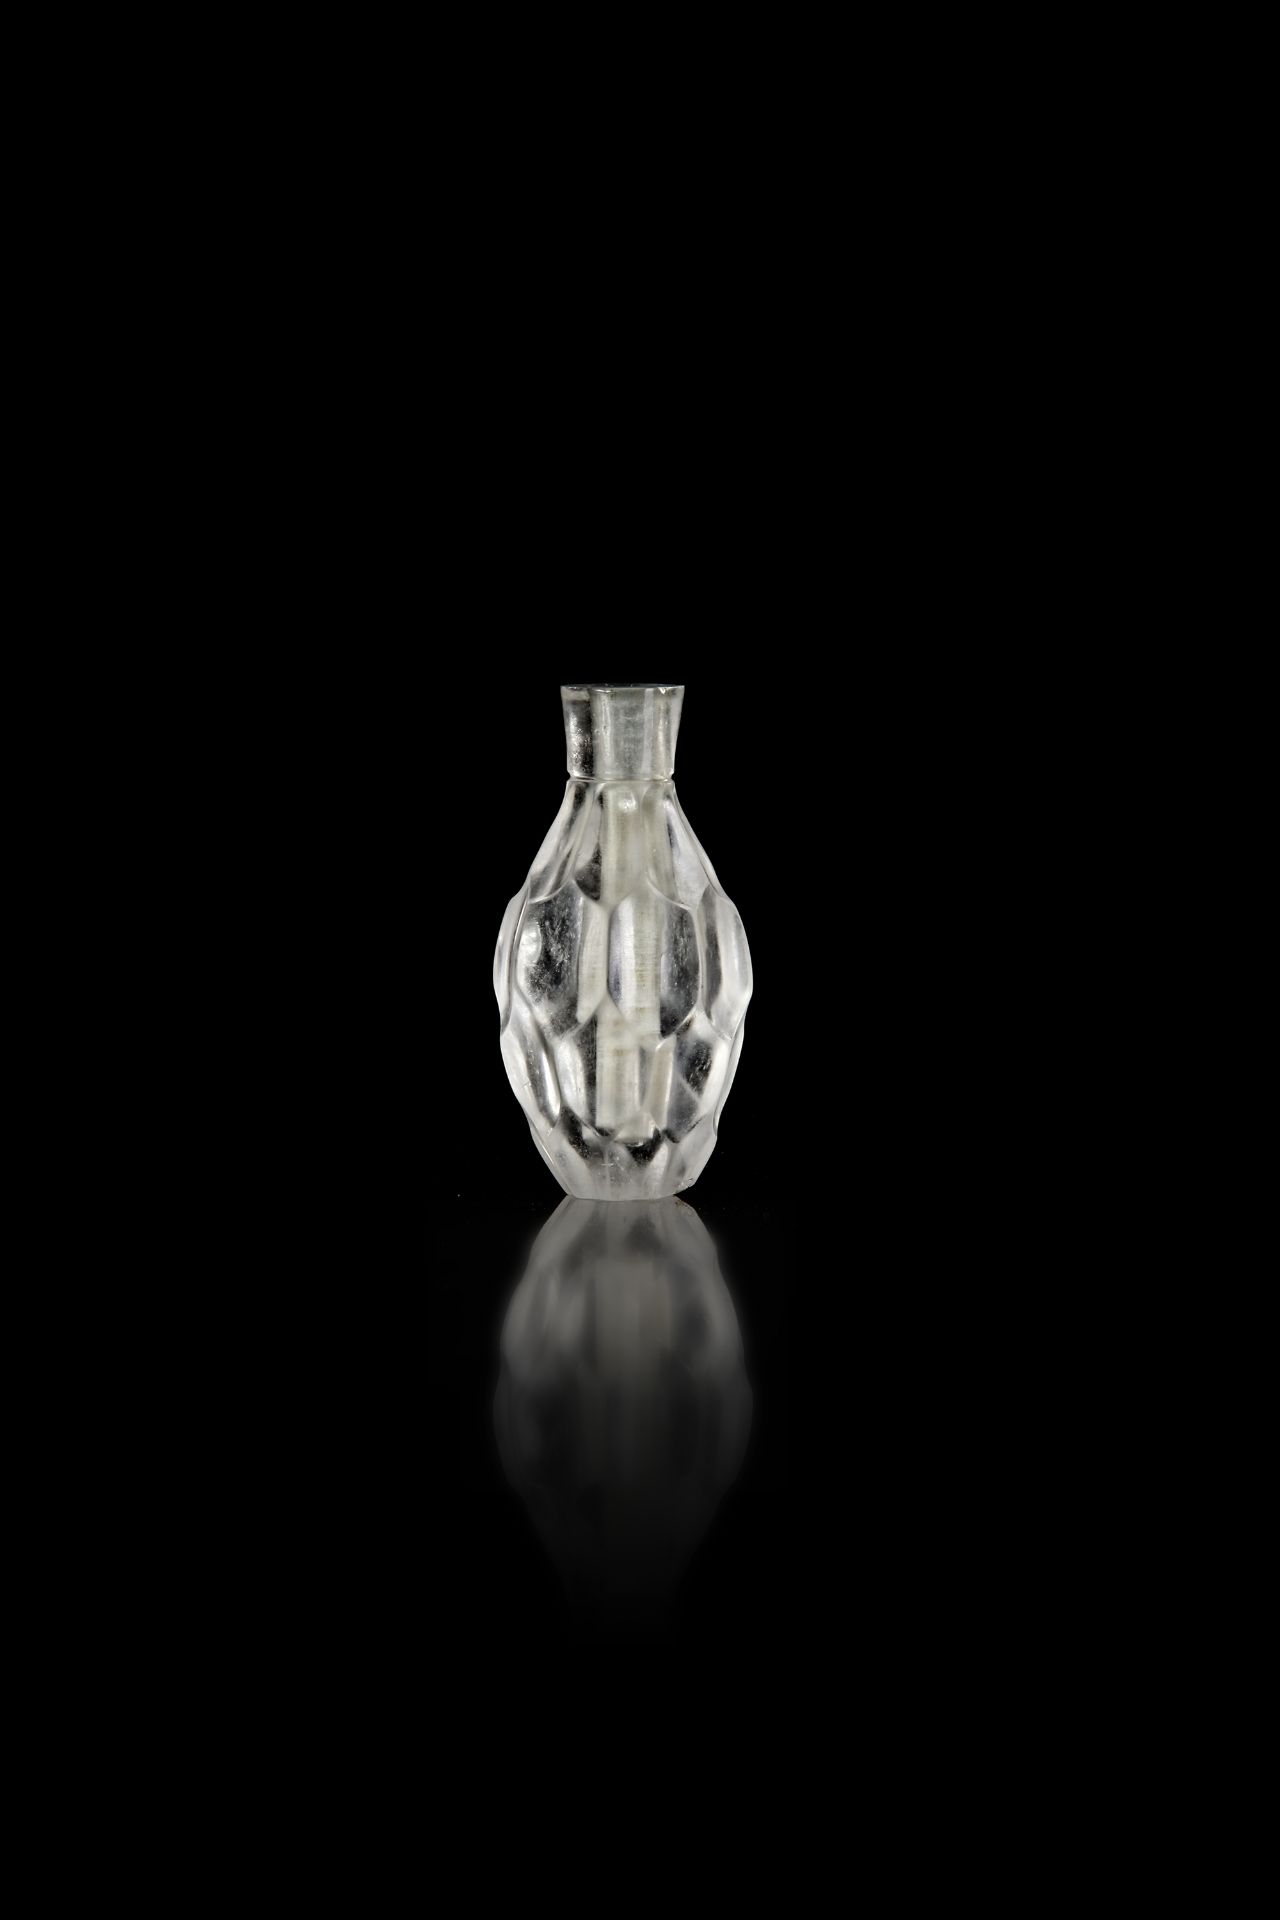 A FATIMID ROCK CRYSTAL PERFUME FLASK, EGYPT, 10TH-12TH CENTURY - Image 3 of 5